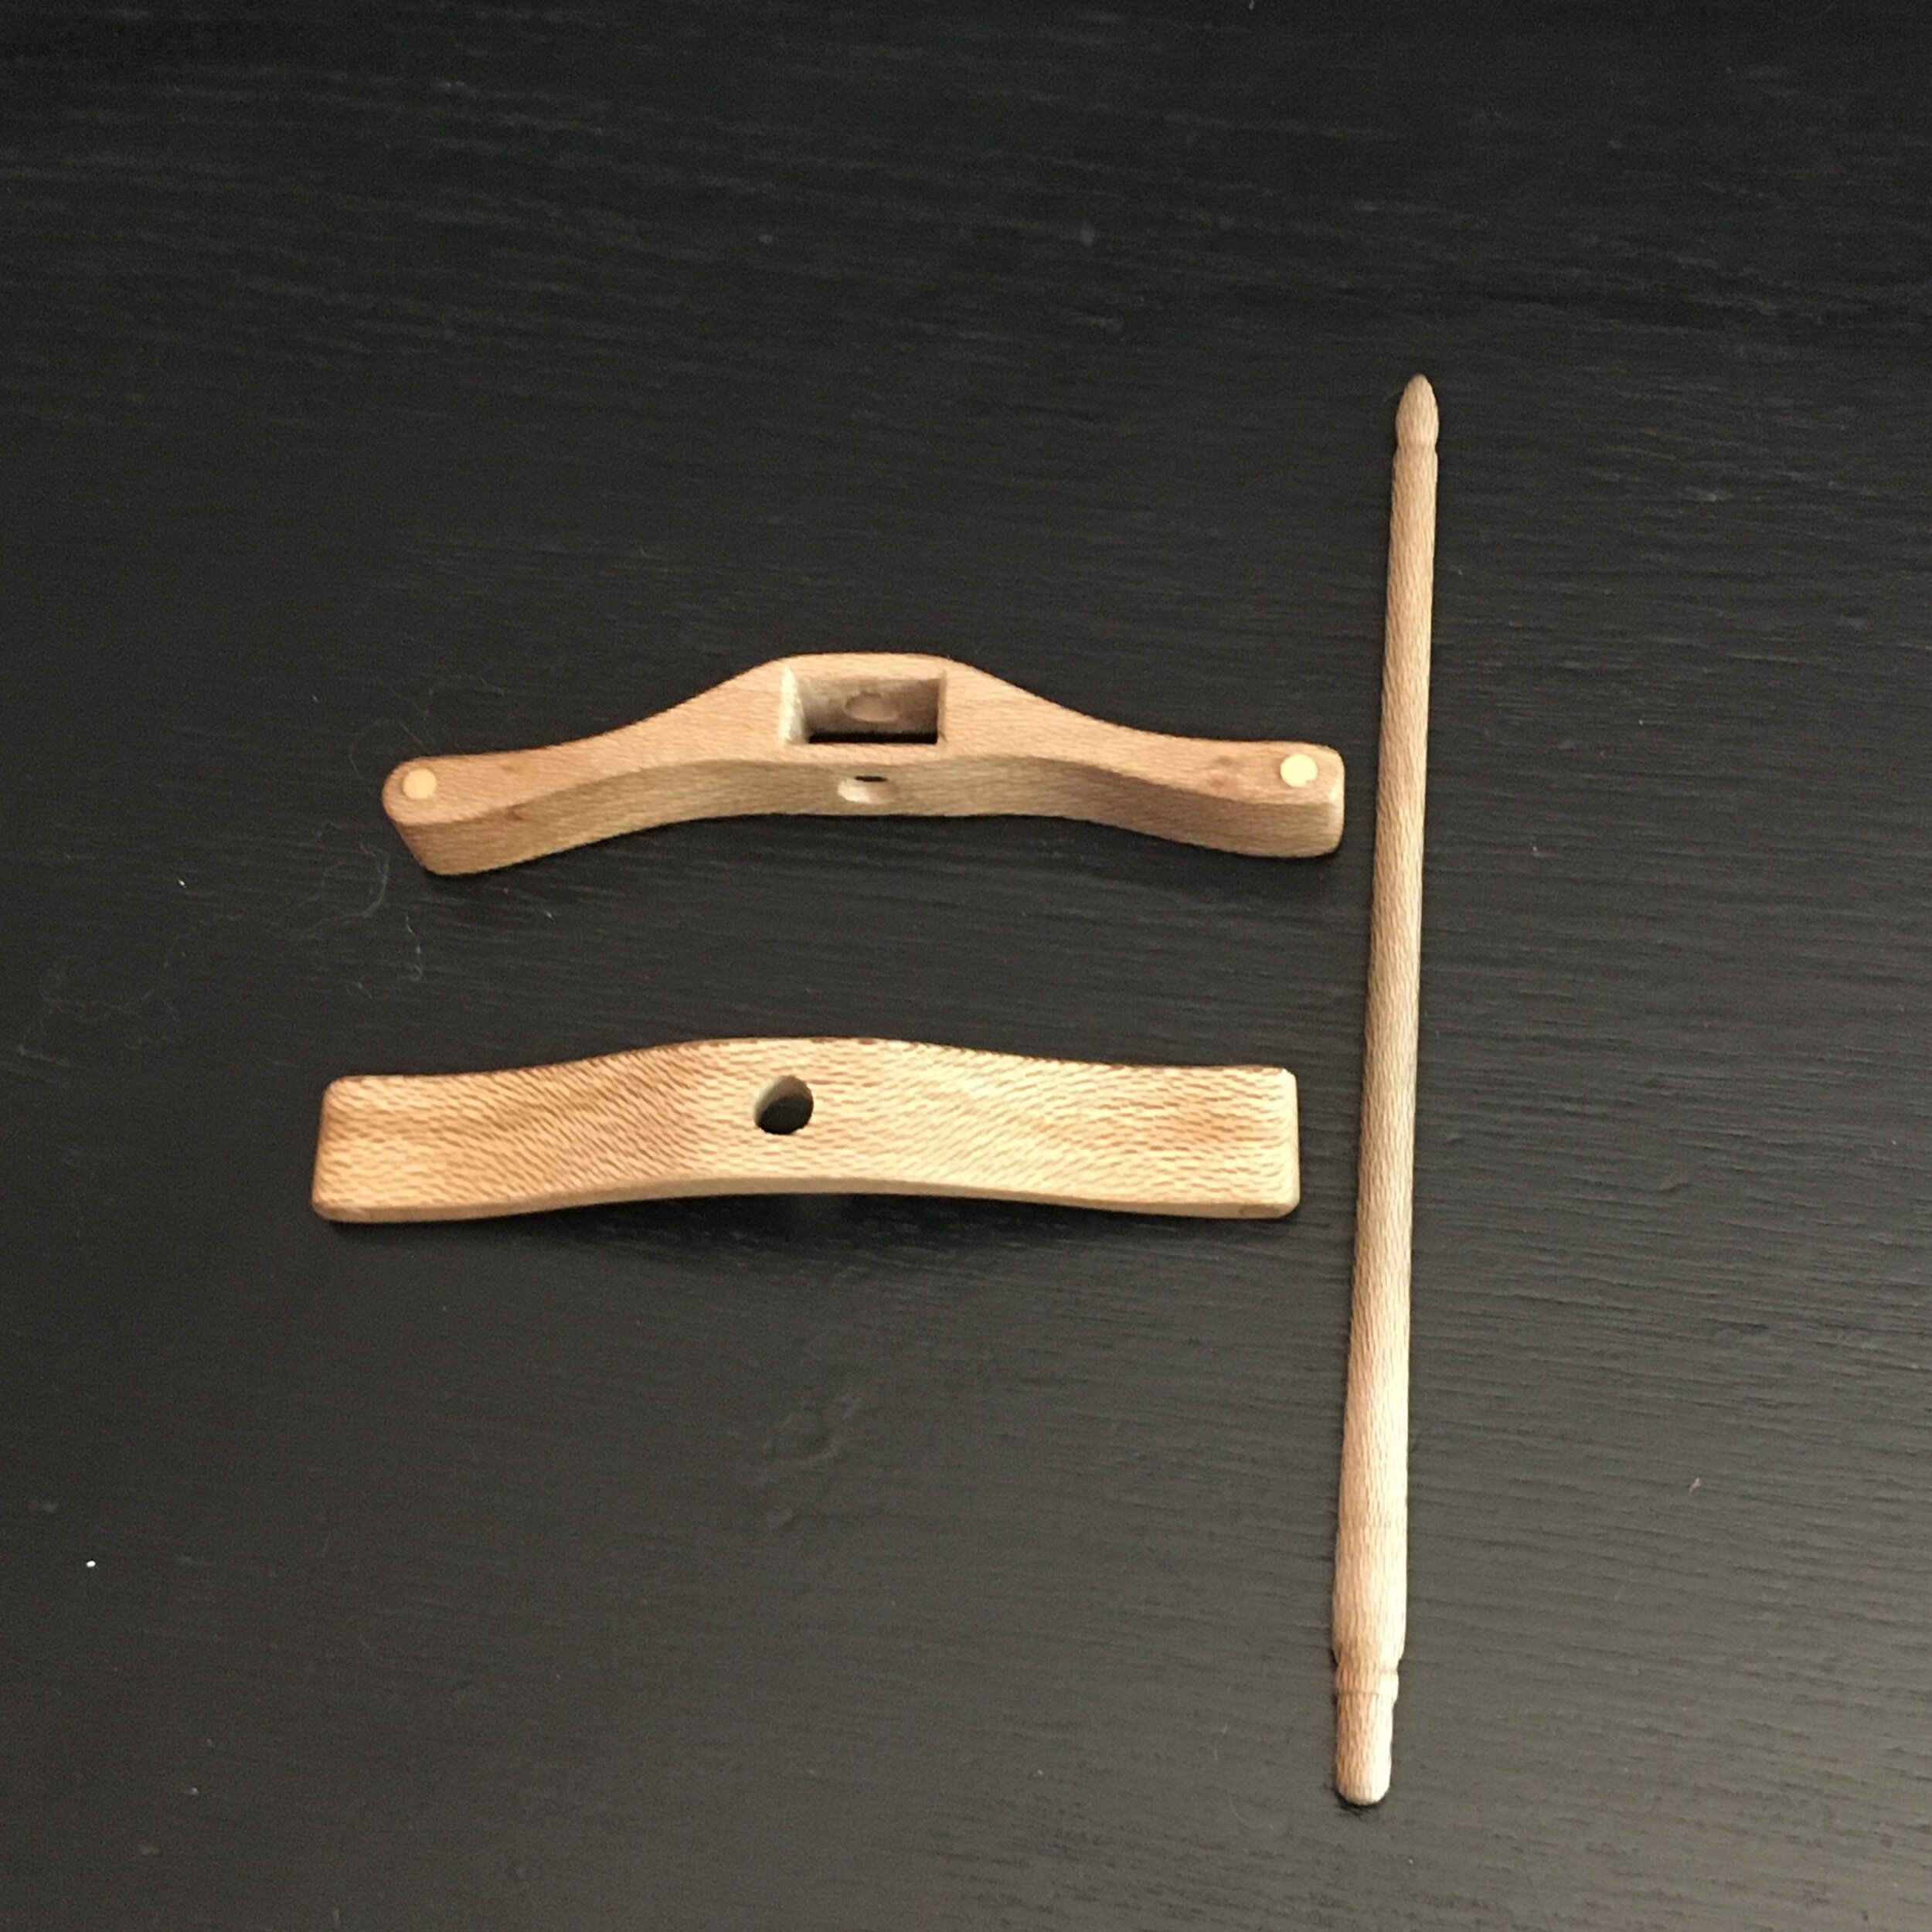 Pieces of a Turkish spindle